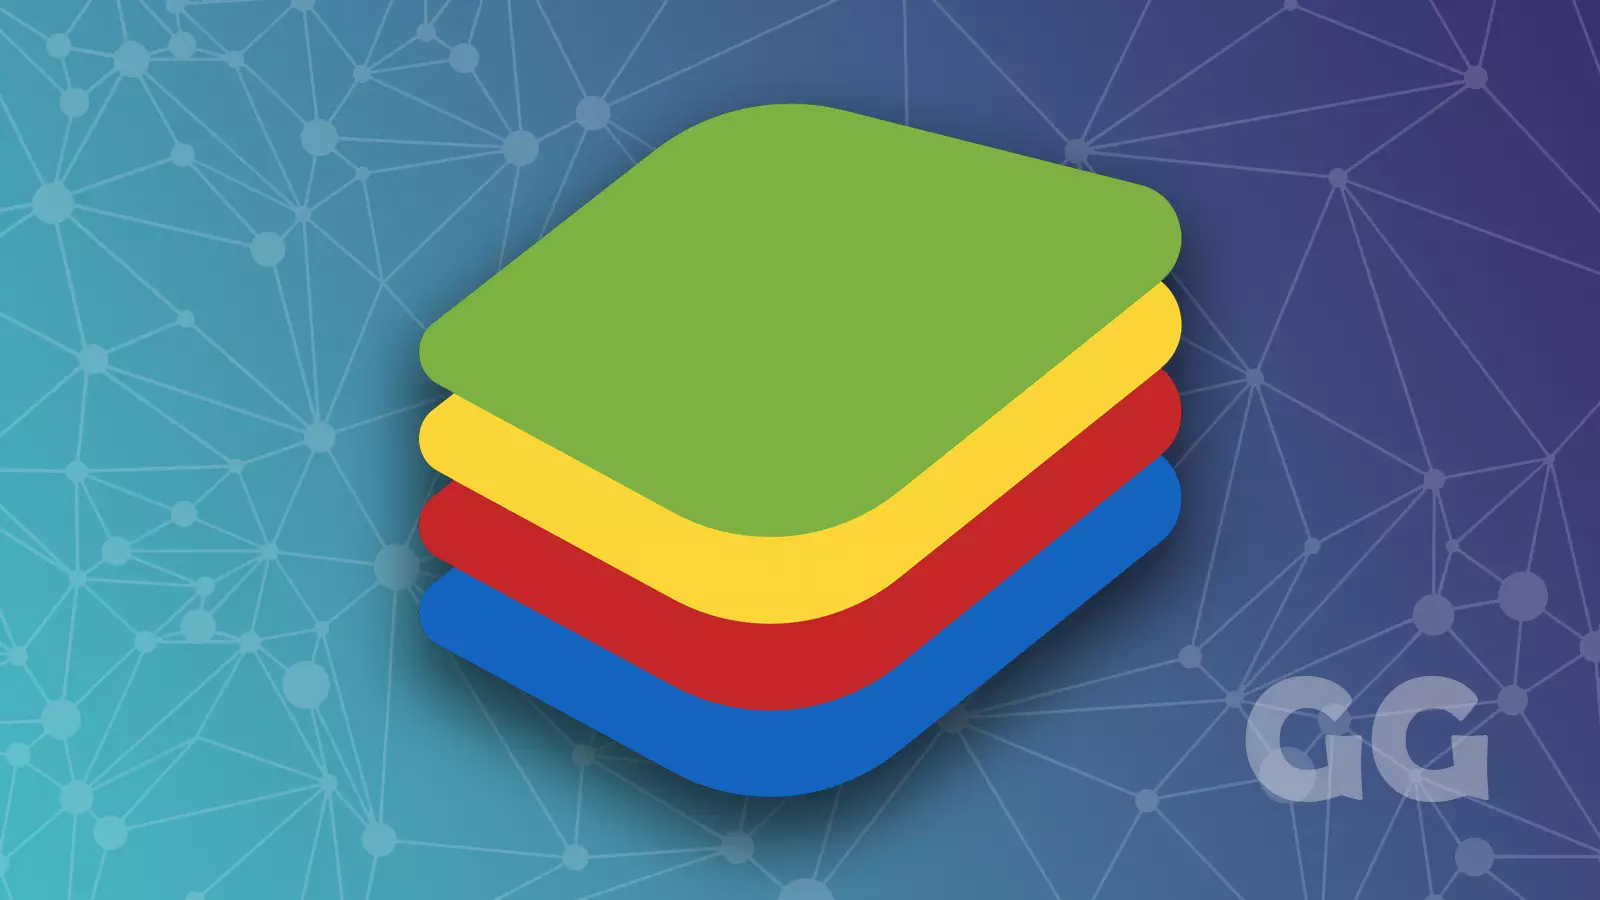 bluestacks logo on a blurred blue and teal background